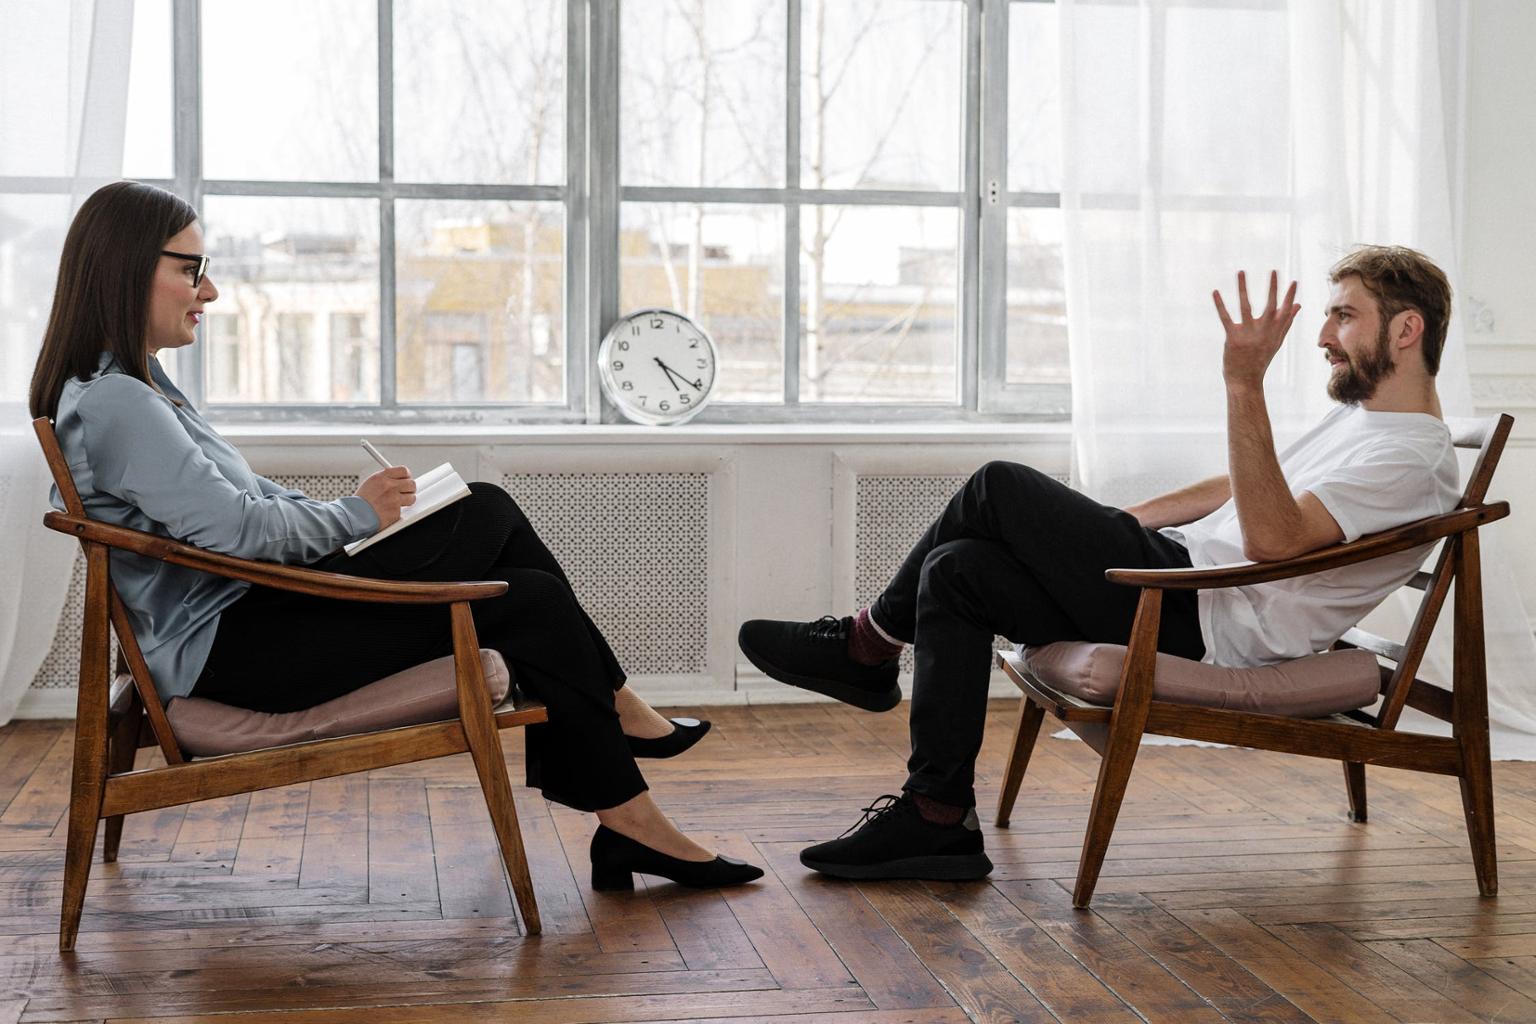 This photo shows two people sitting across from each other, talking